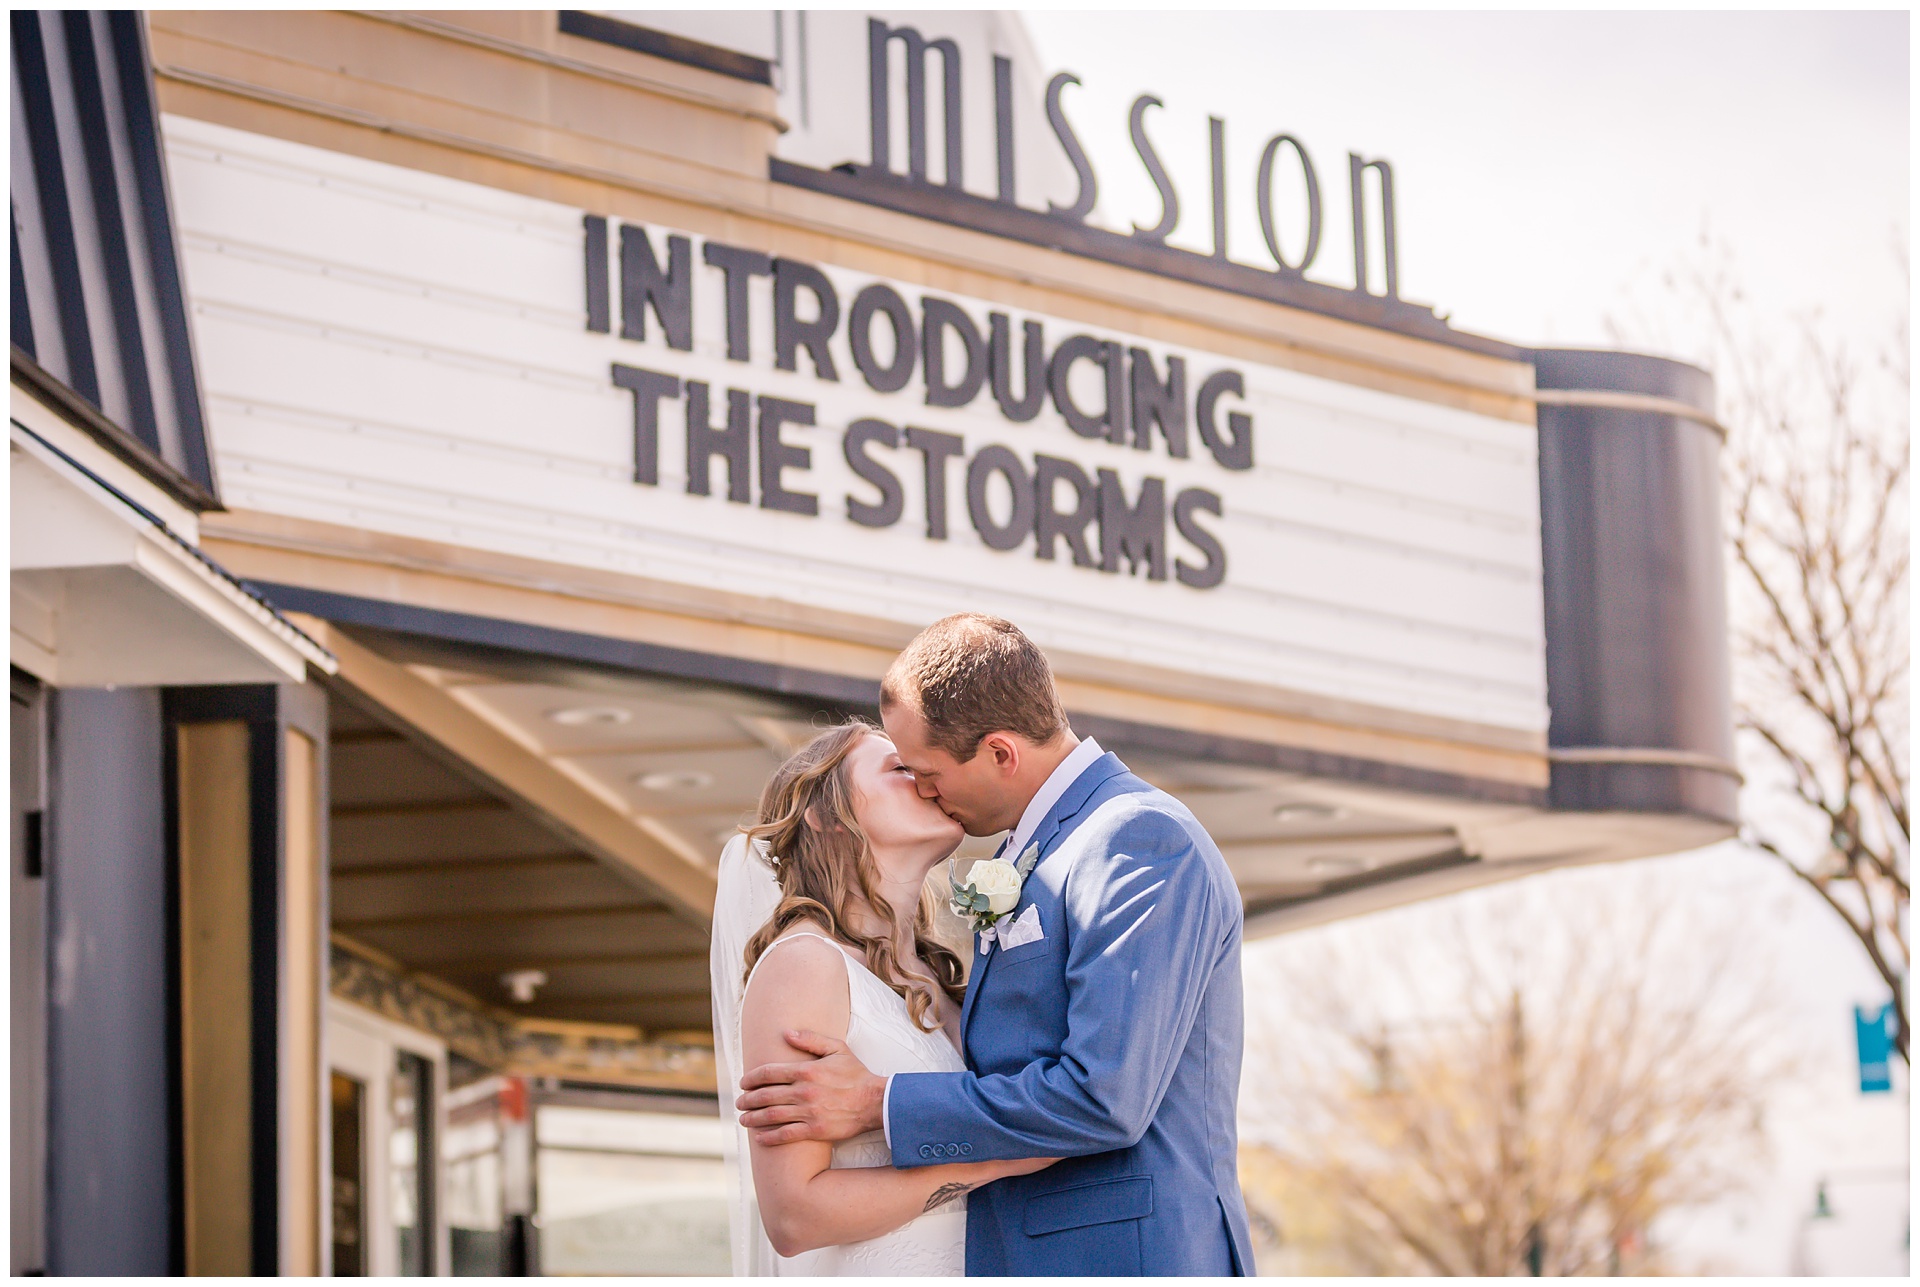 Wedding photography at The Mission Theatre in Mission, Kansas, by Kansas City wedding photographers Wisdom-Watson Weddings.